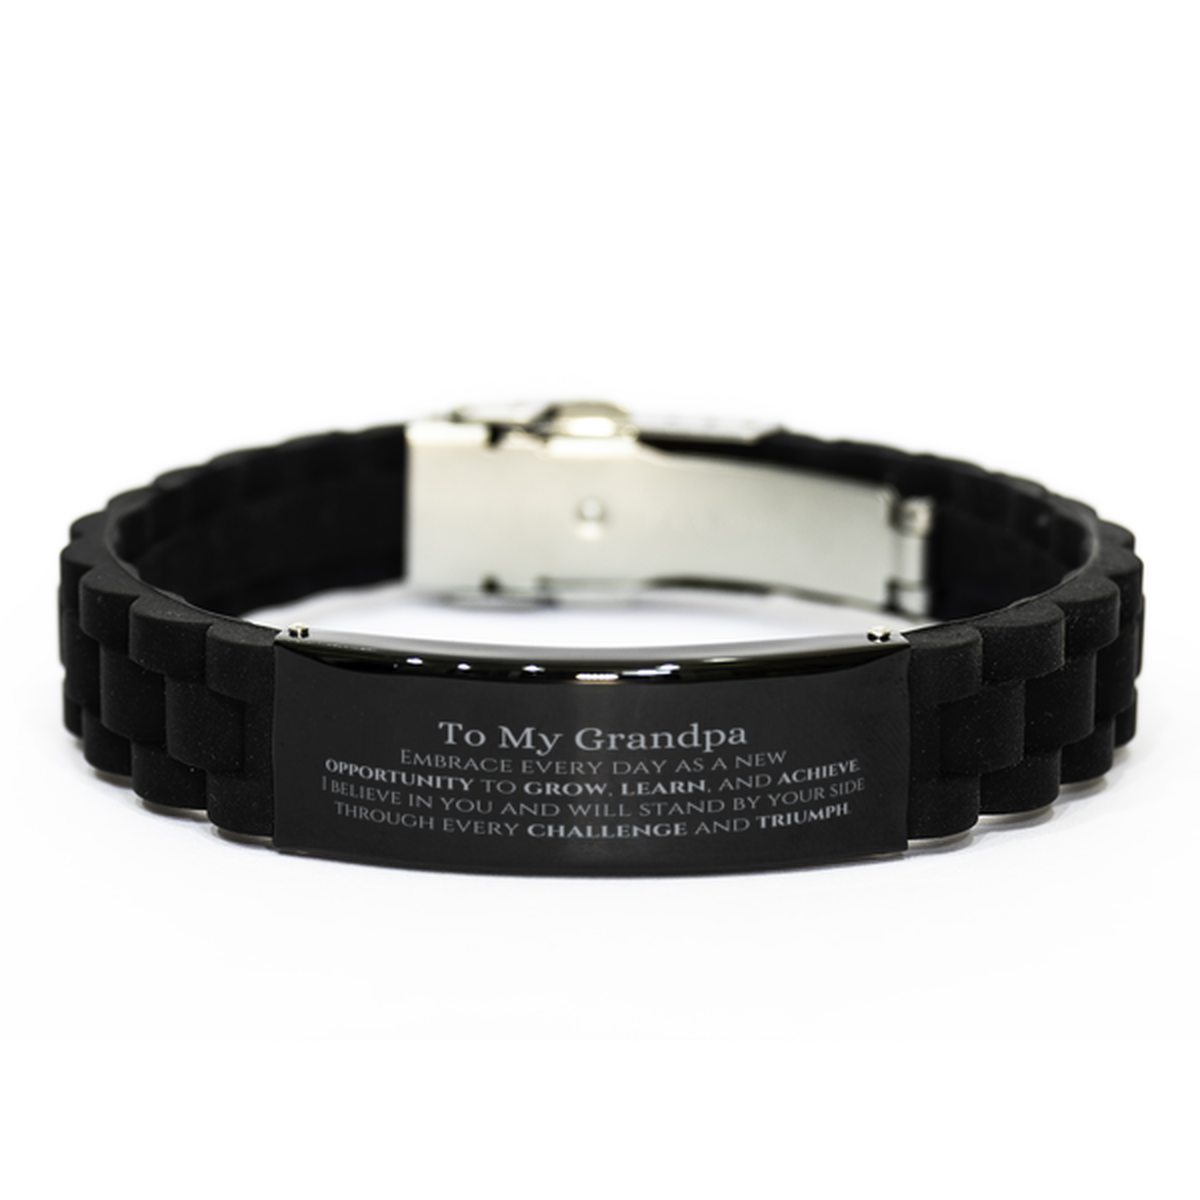 To My Grandpa Gifts, I believe in you and will stand by your side, Inspirational Black Glidelock Clasp Bracelet For Grandpa, Birthday Christmas Motivational Grandpa Gifts